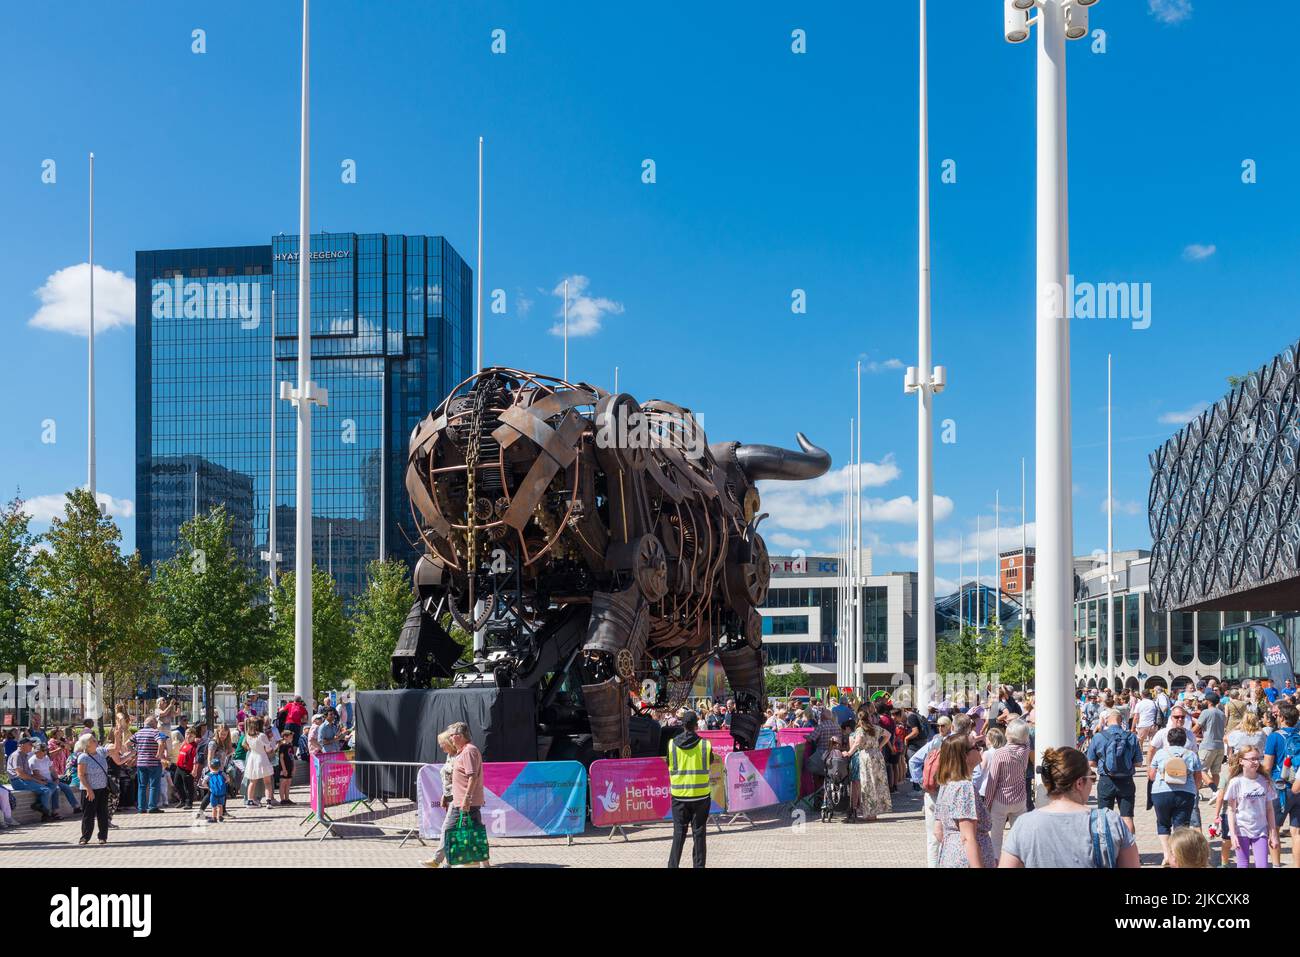 Crowds of visitors in Birmingham for the 2022 Commonwealth Games viewing the Bull that featured in the opening ceremony Stock Photo